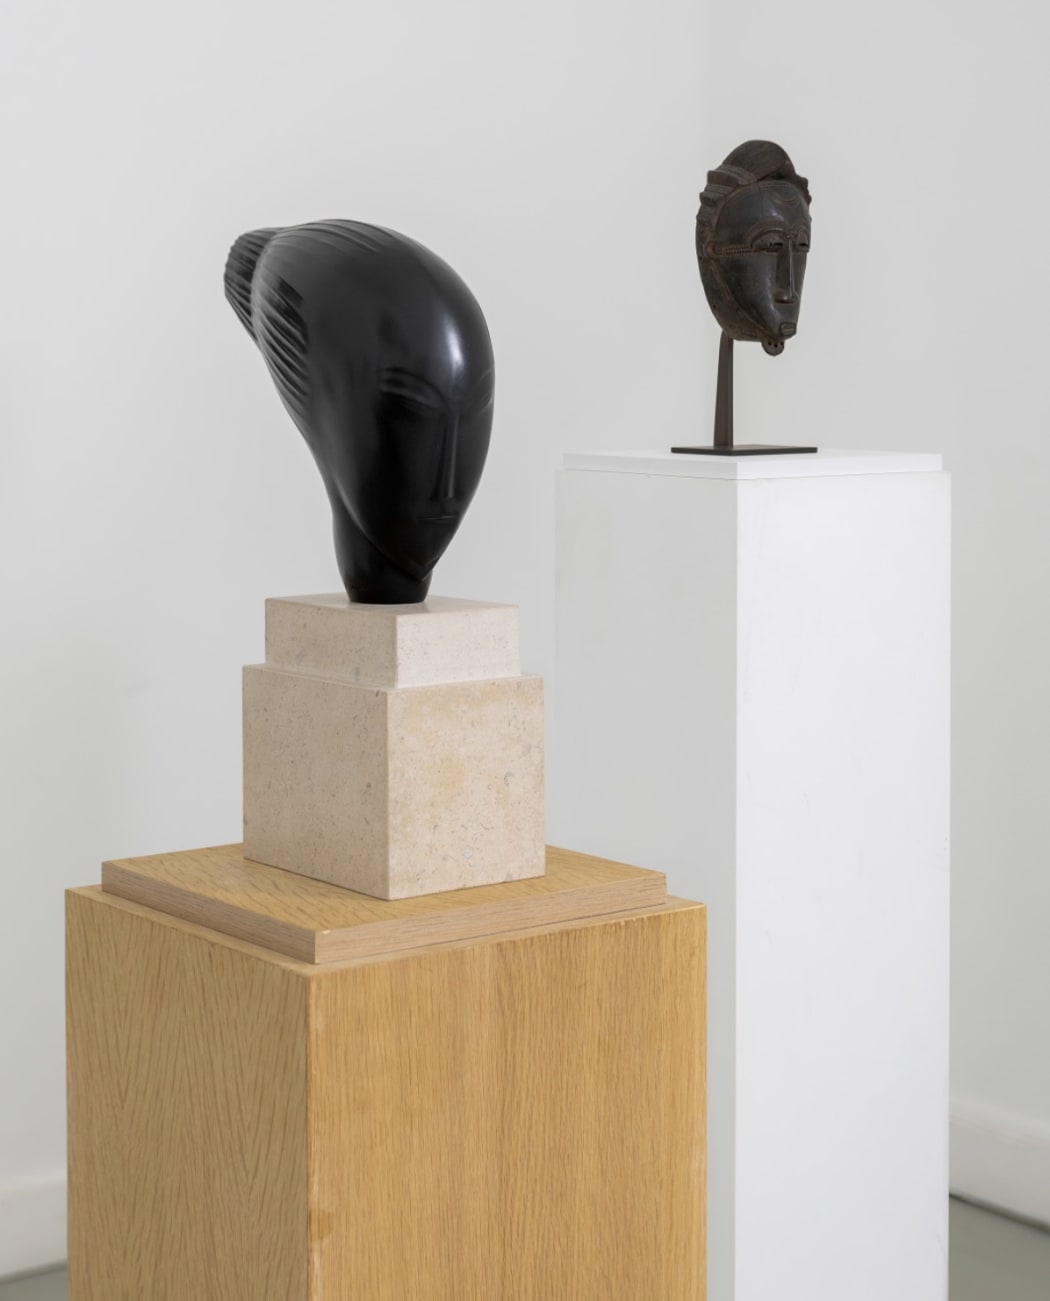 Flemish modernists and classical African art – an art-historical dialog on view at Echoes